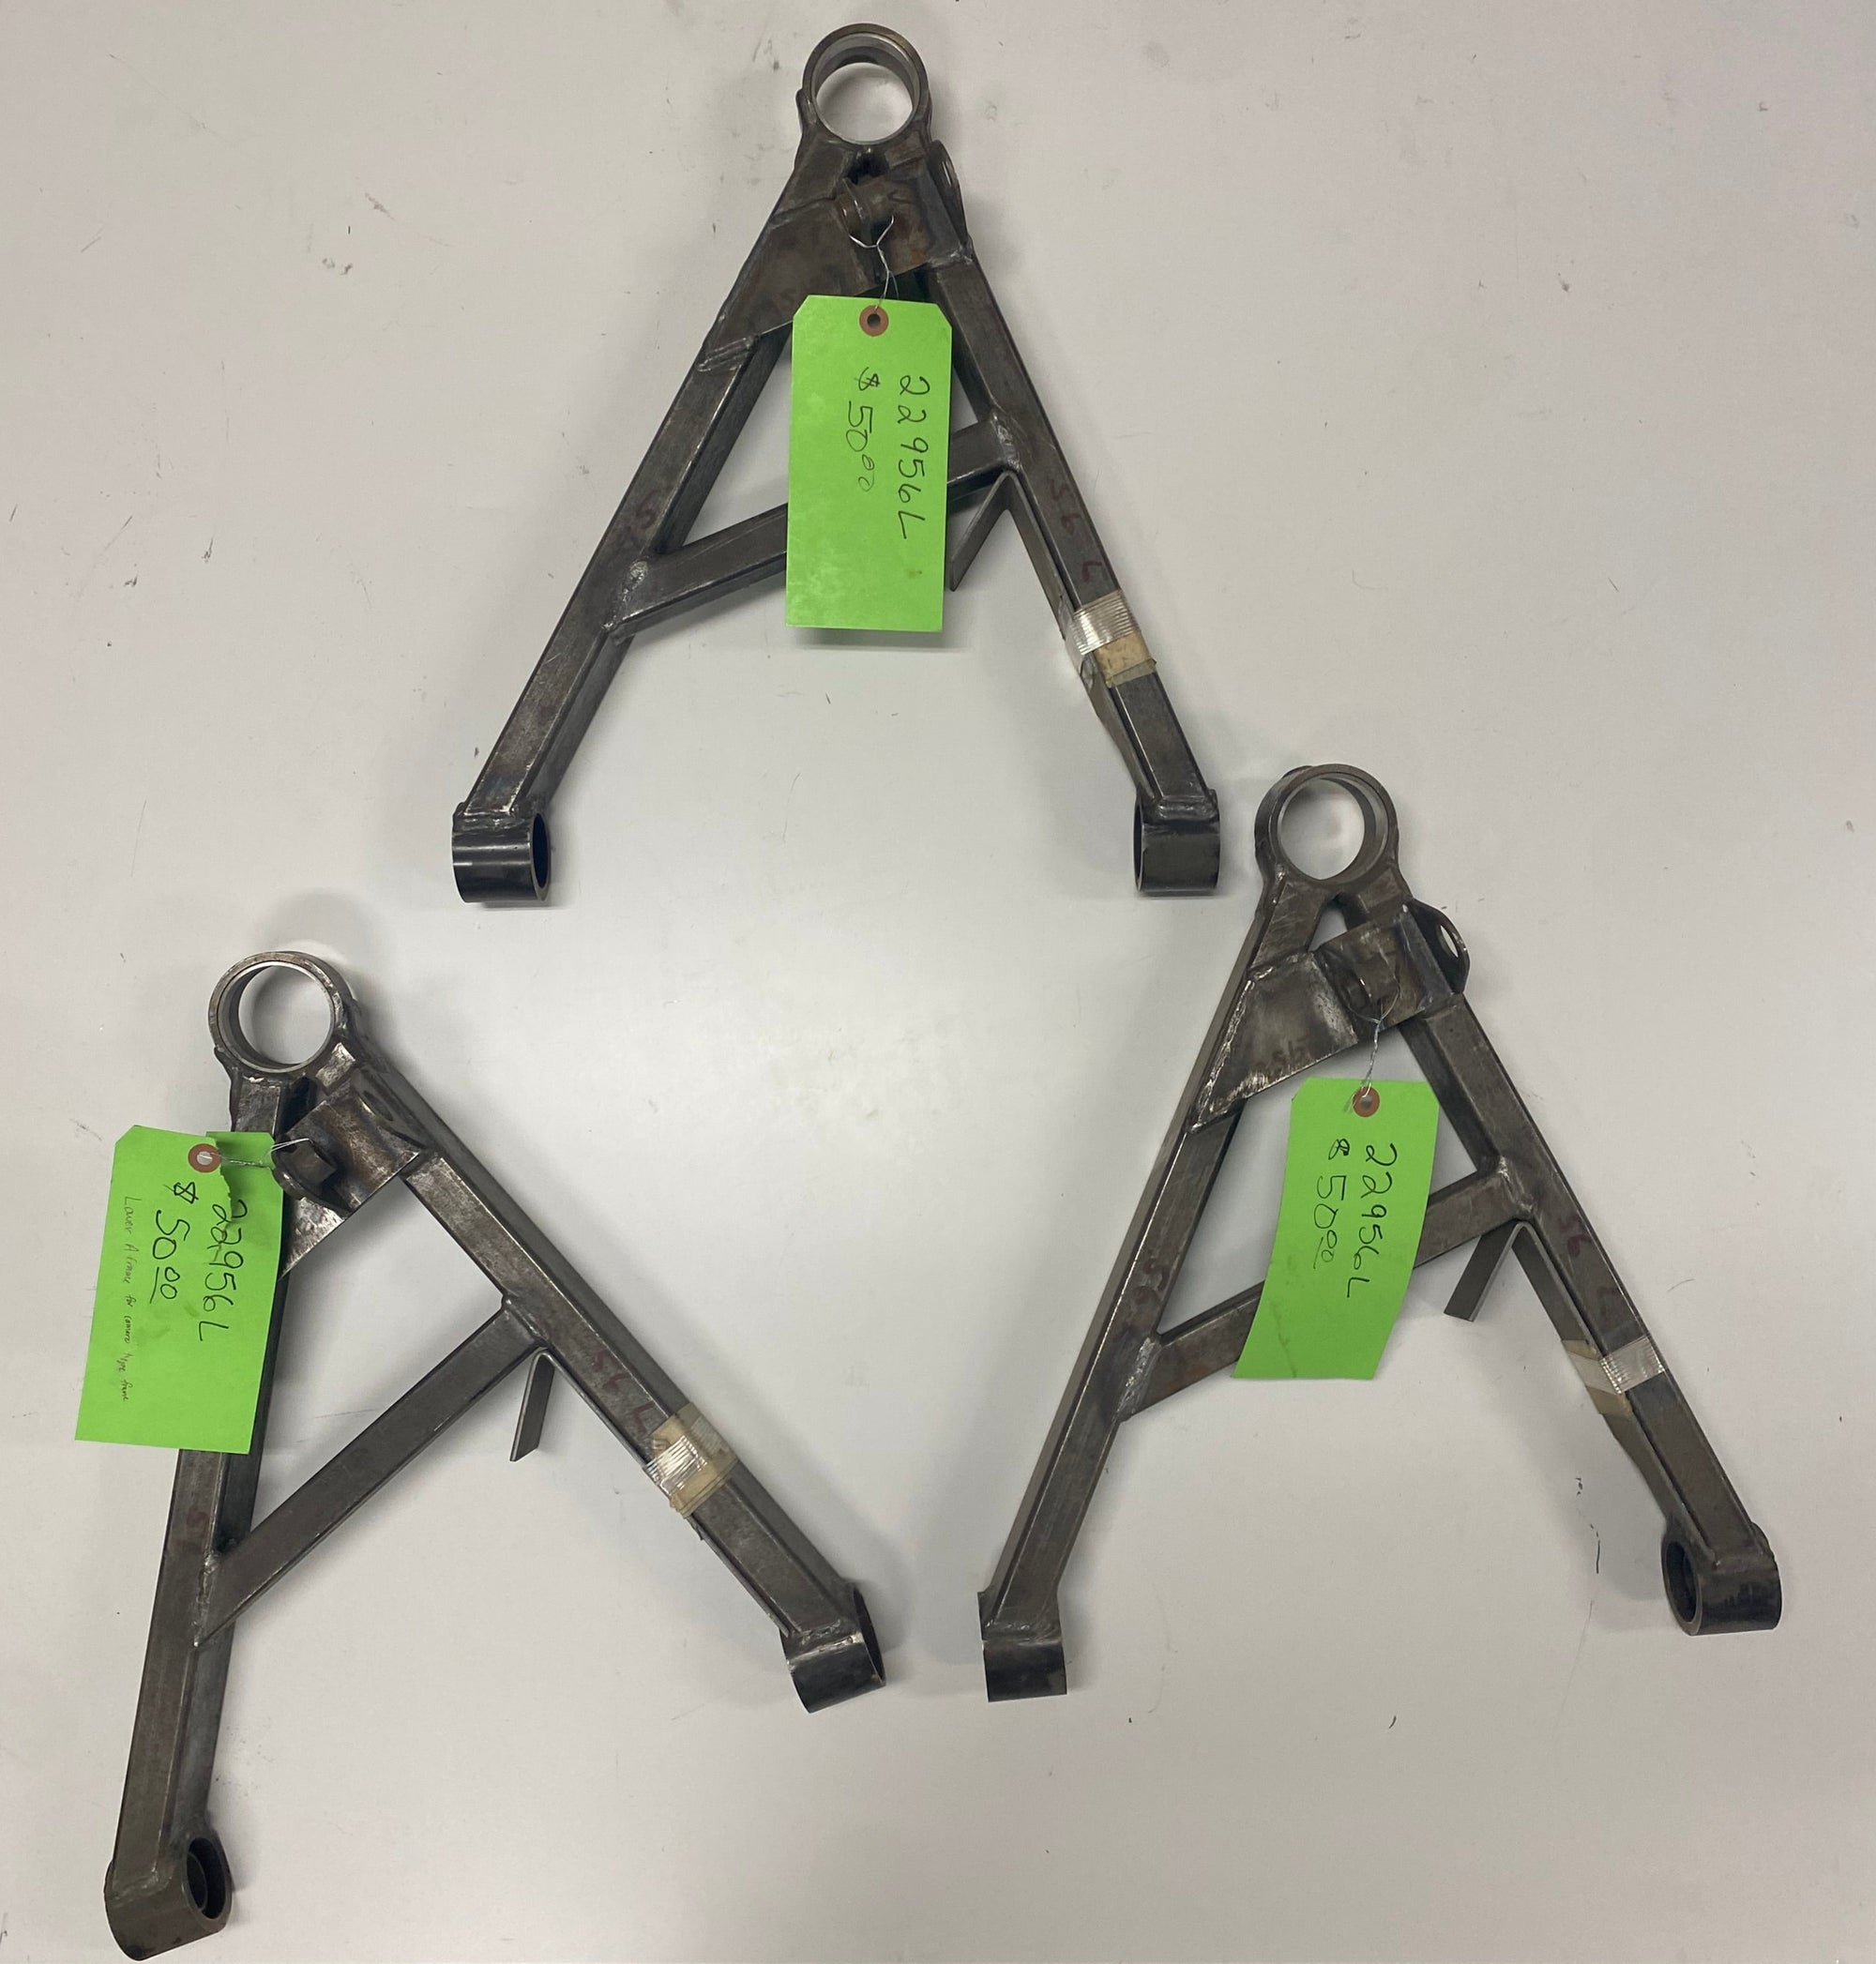 USED LOWER A-FRAME FOR CAMARO TYPE FRAME (SET OF 3)